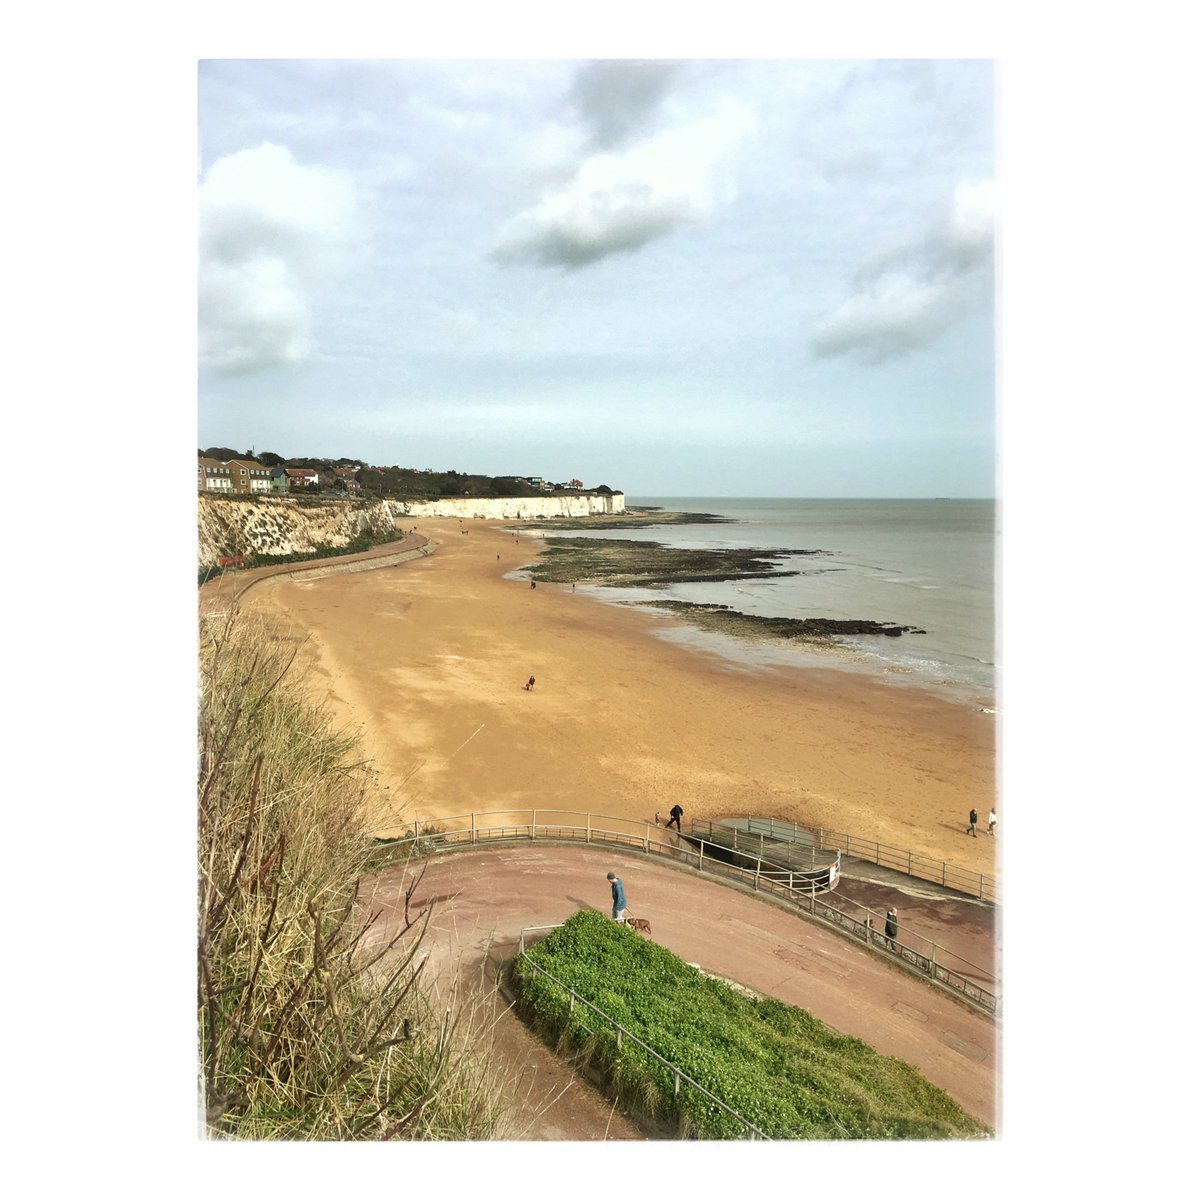 The view on the way this mornings shoot in #Broadstairs, was so nice out I had to document it. #seaside #dogwalkers #Kent #coastline #landscapephotography #England